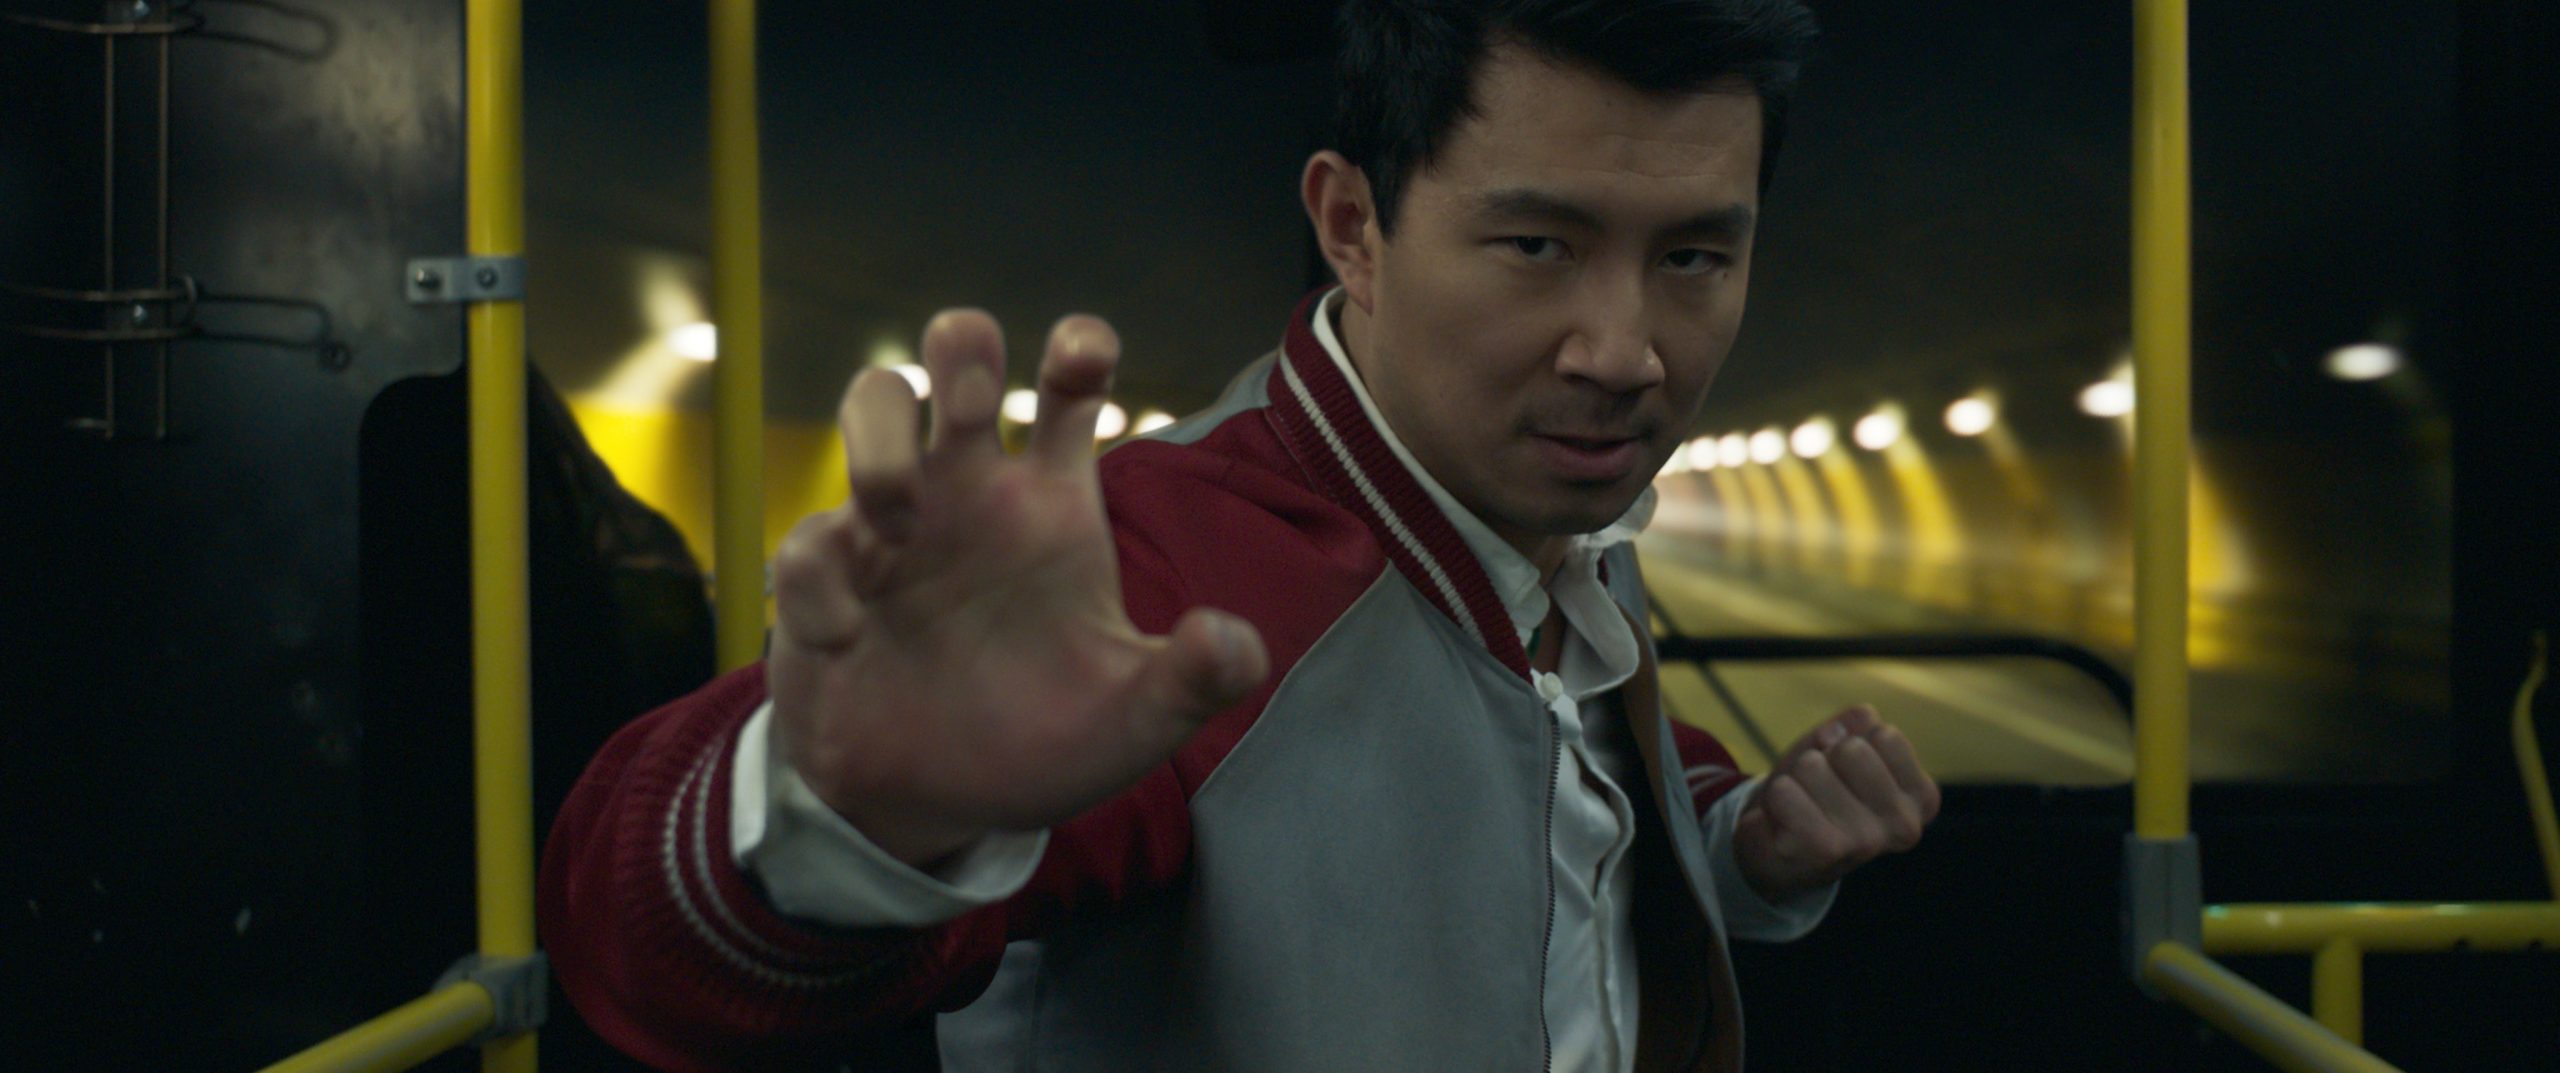 Shang Chi Review: Marvel’s Best Action Movie Hits More Than It Misses